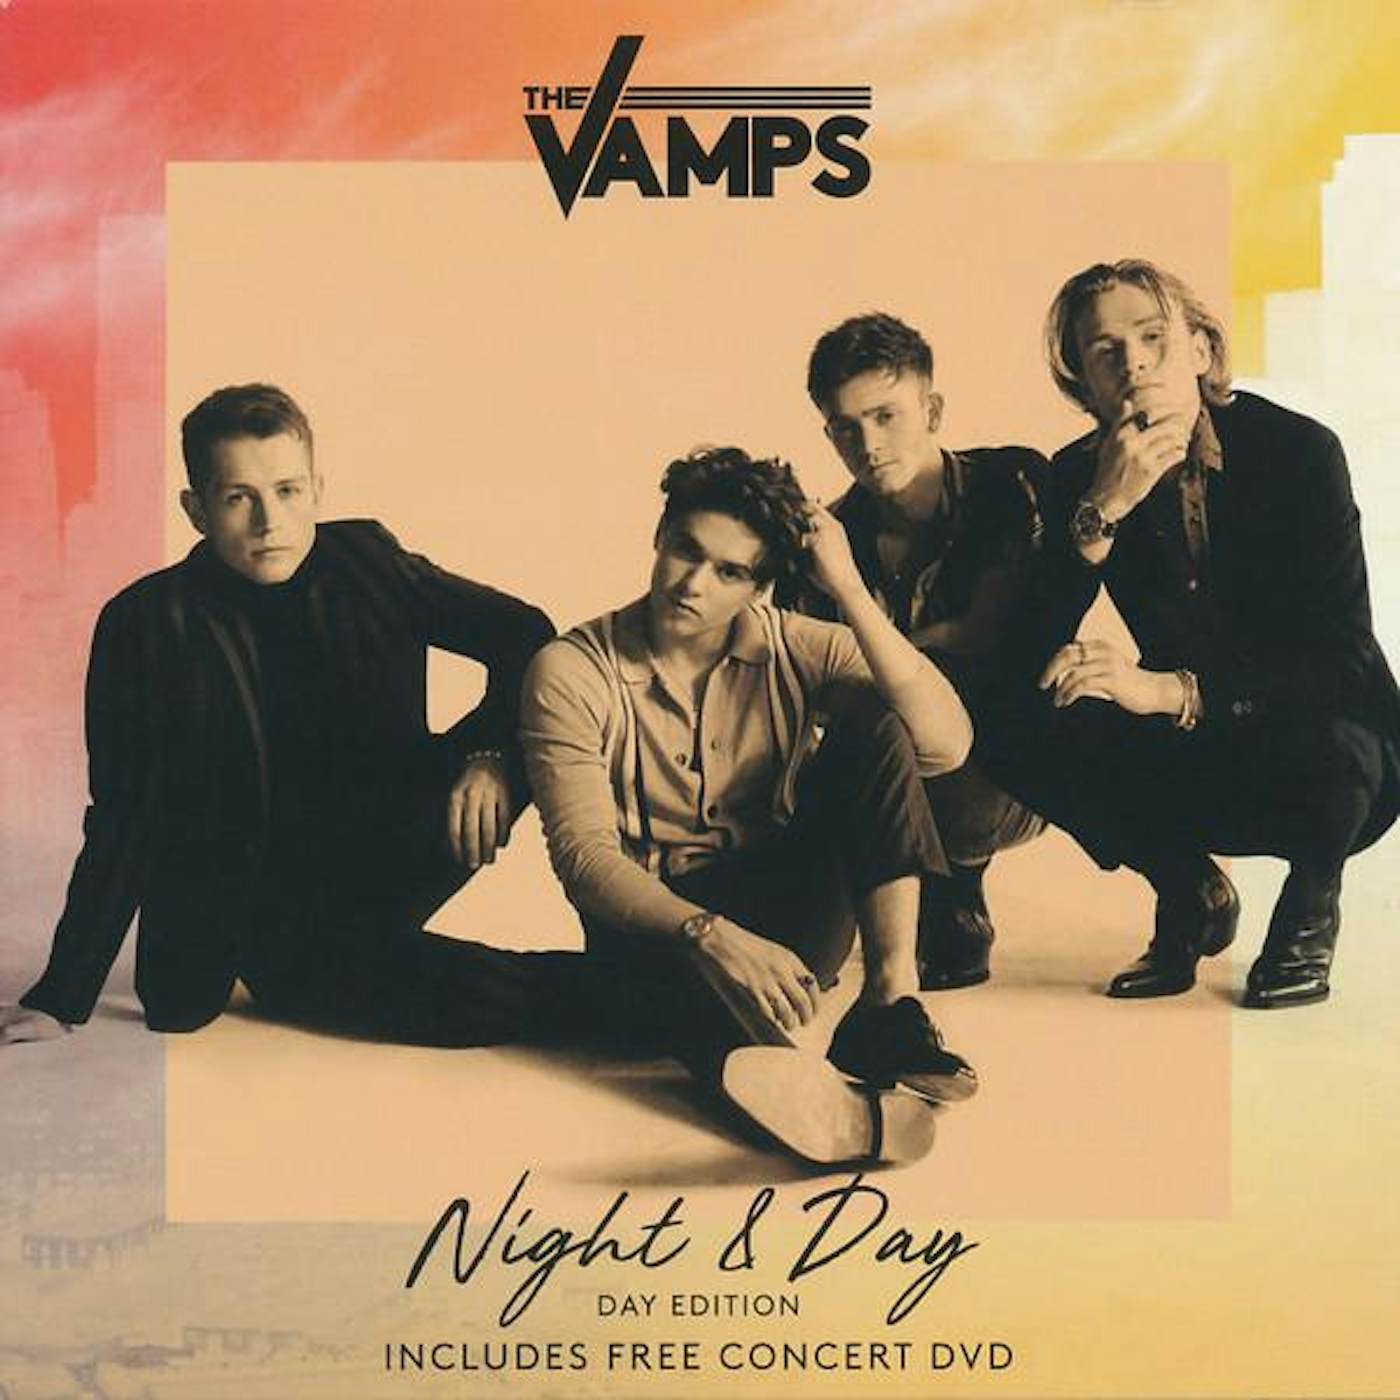 The Vamps NIGHT AND DAY DAY EDITION CD